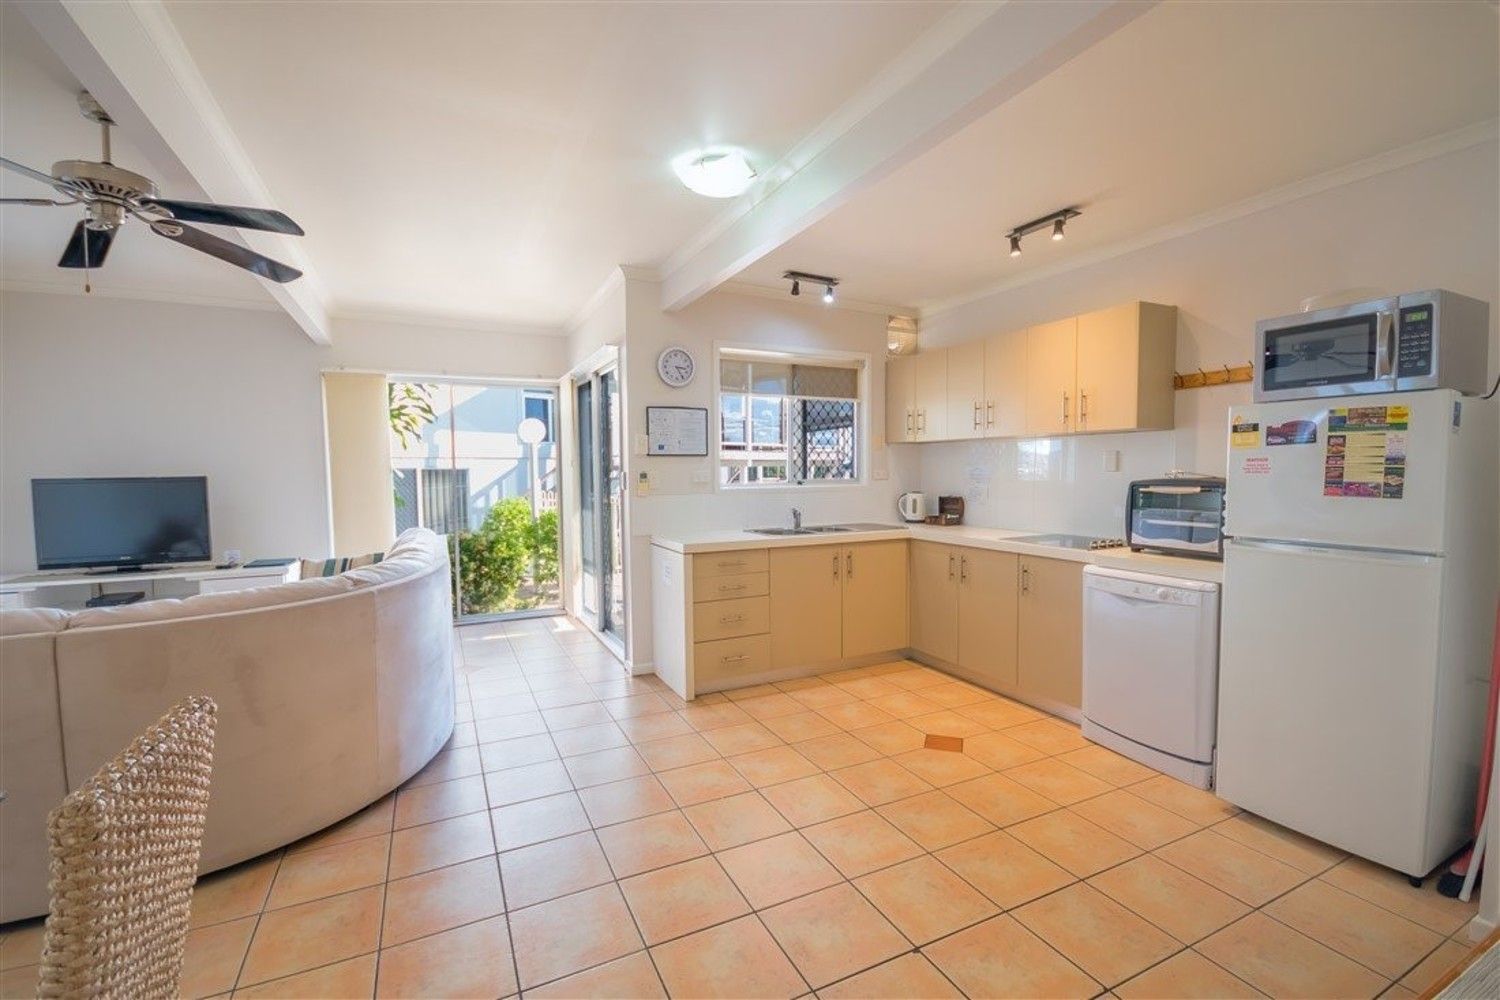 3/22 Airlie Crescent, Airlie Beach QLD 4802, Image 2